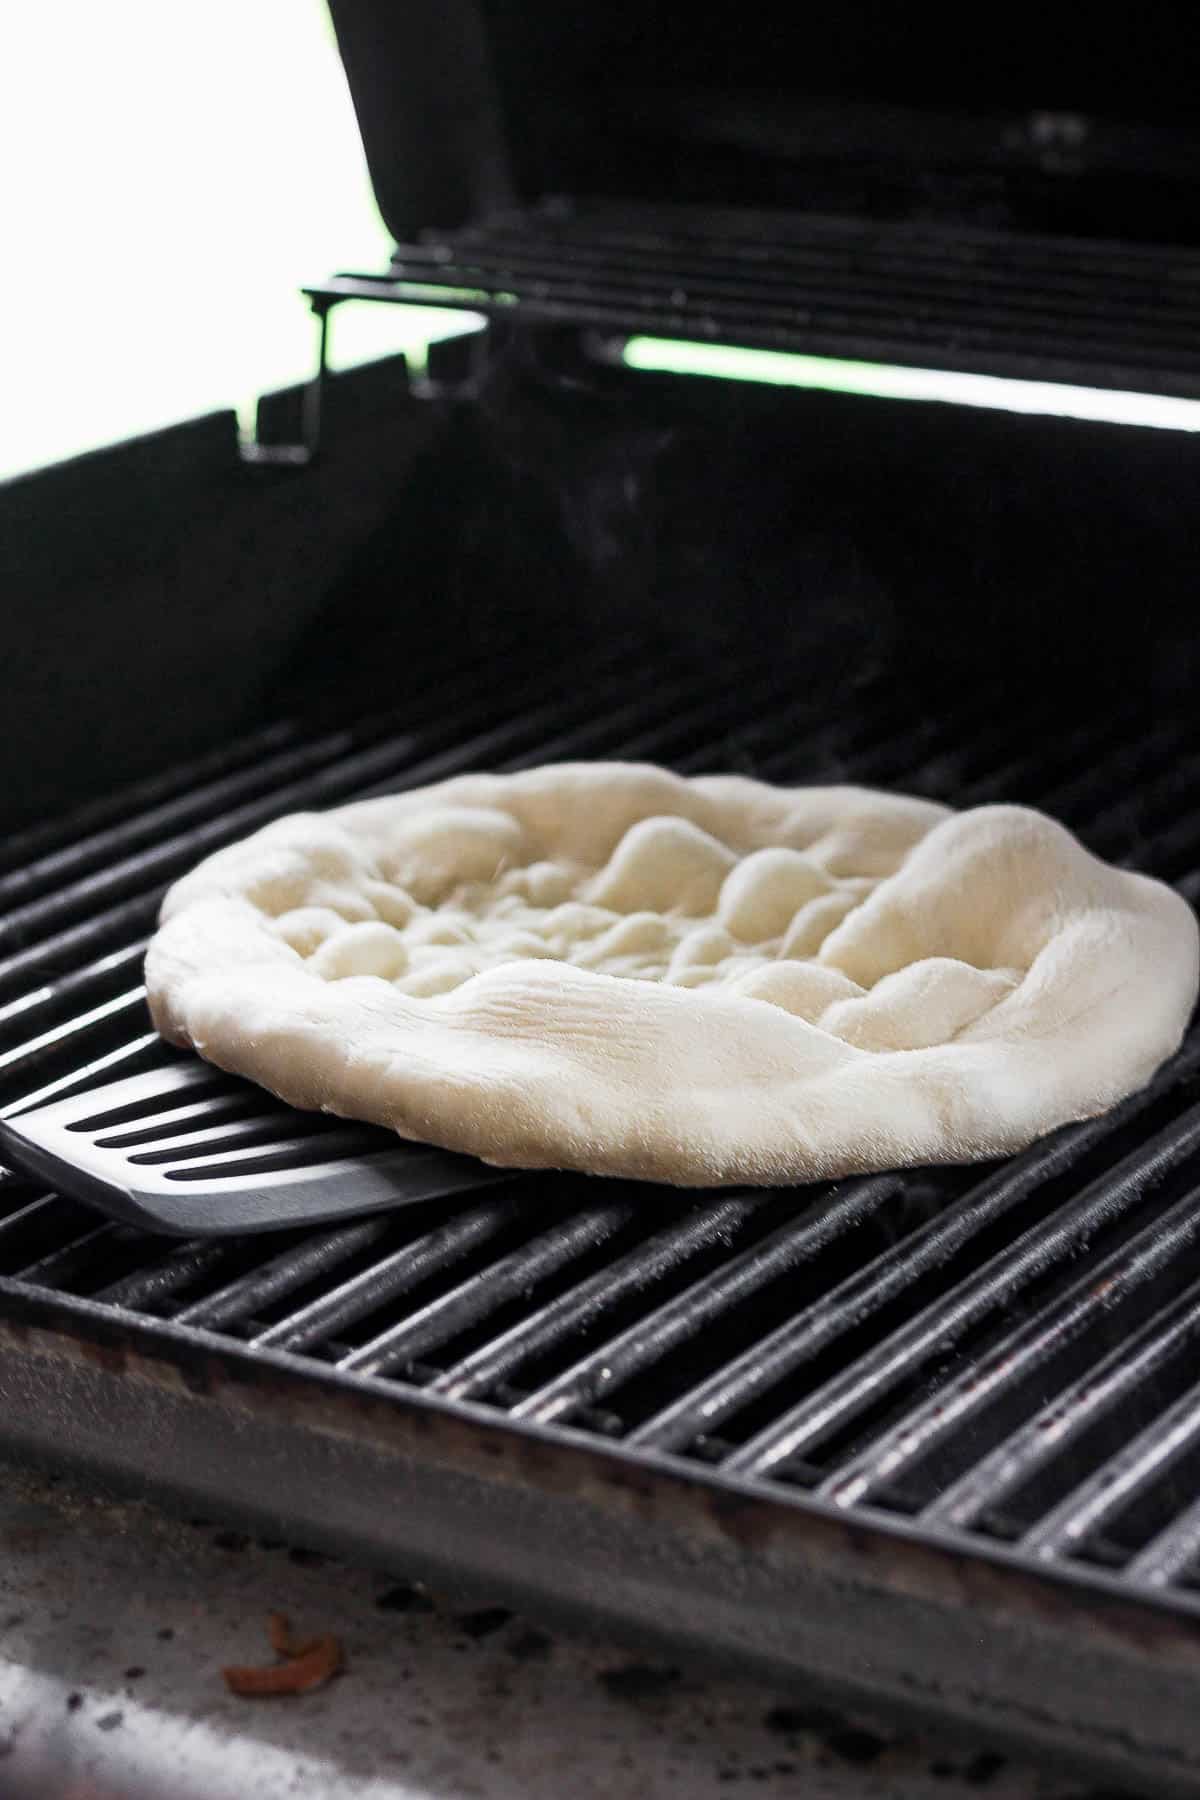 Pizza crust on the grill after cooking for the first 2-3 minutes.